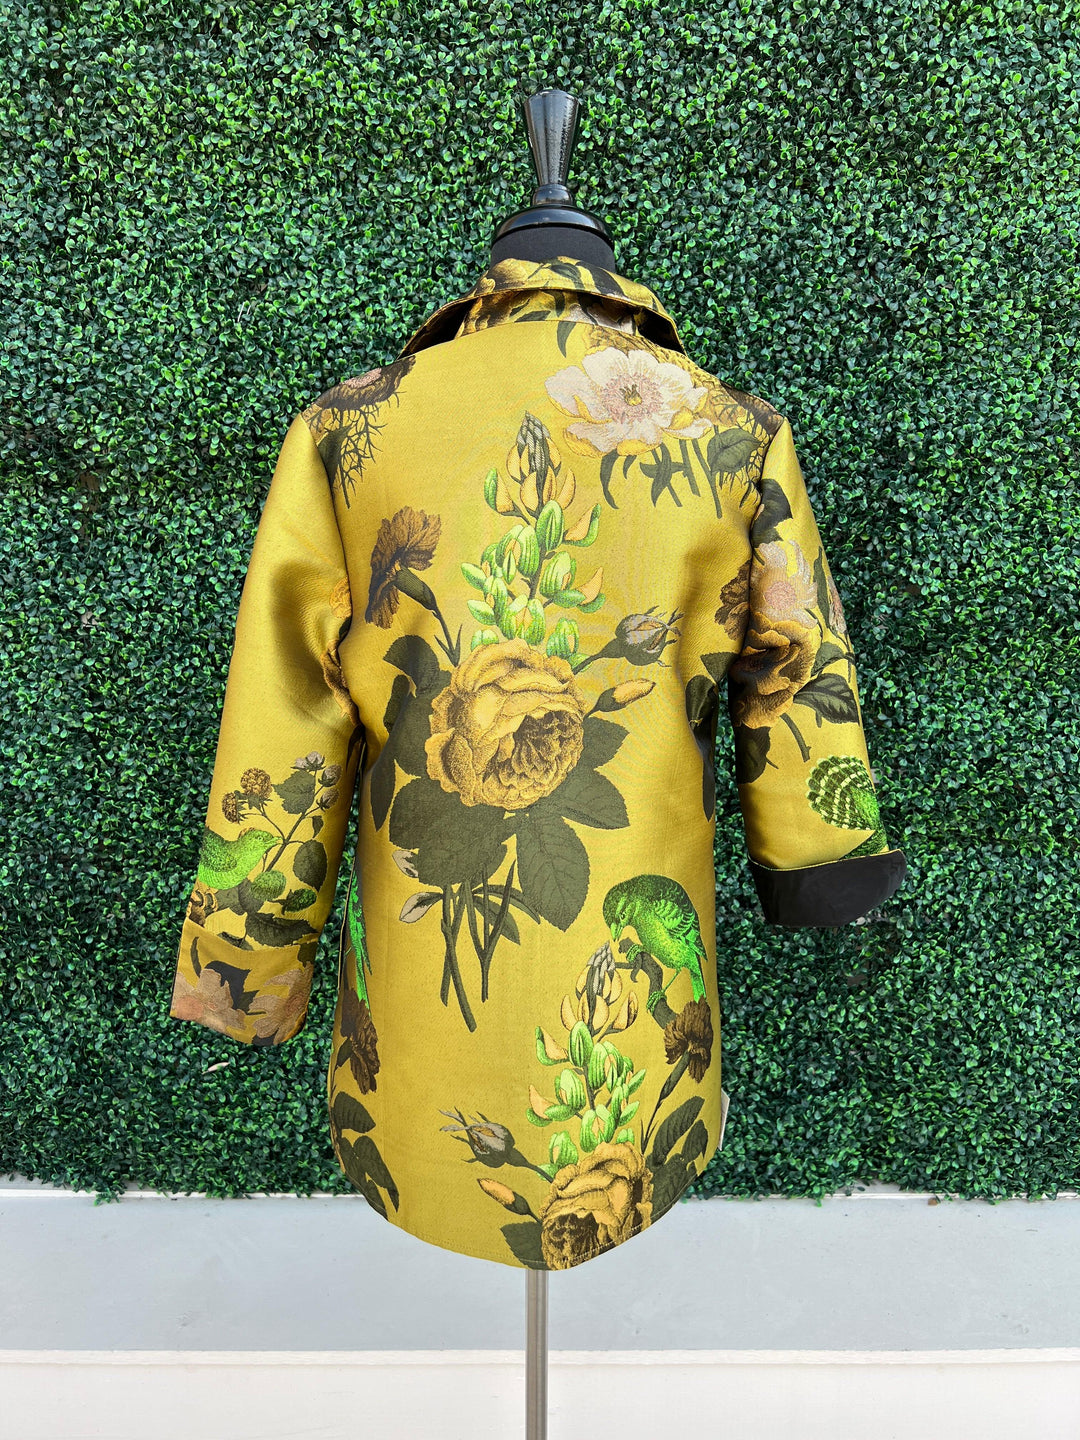 Grace Chuang Jackets new holiday blazer with gold floral print